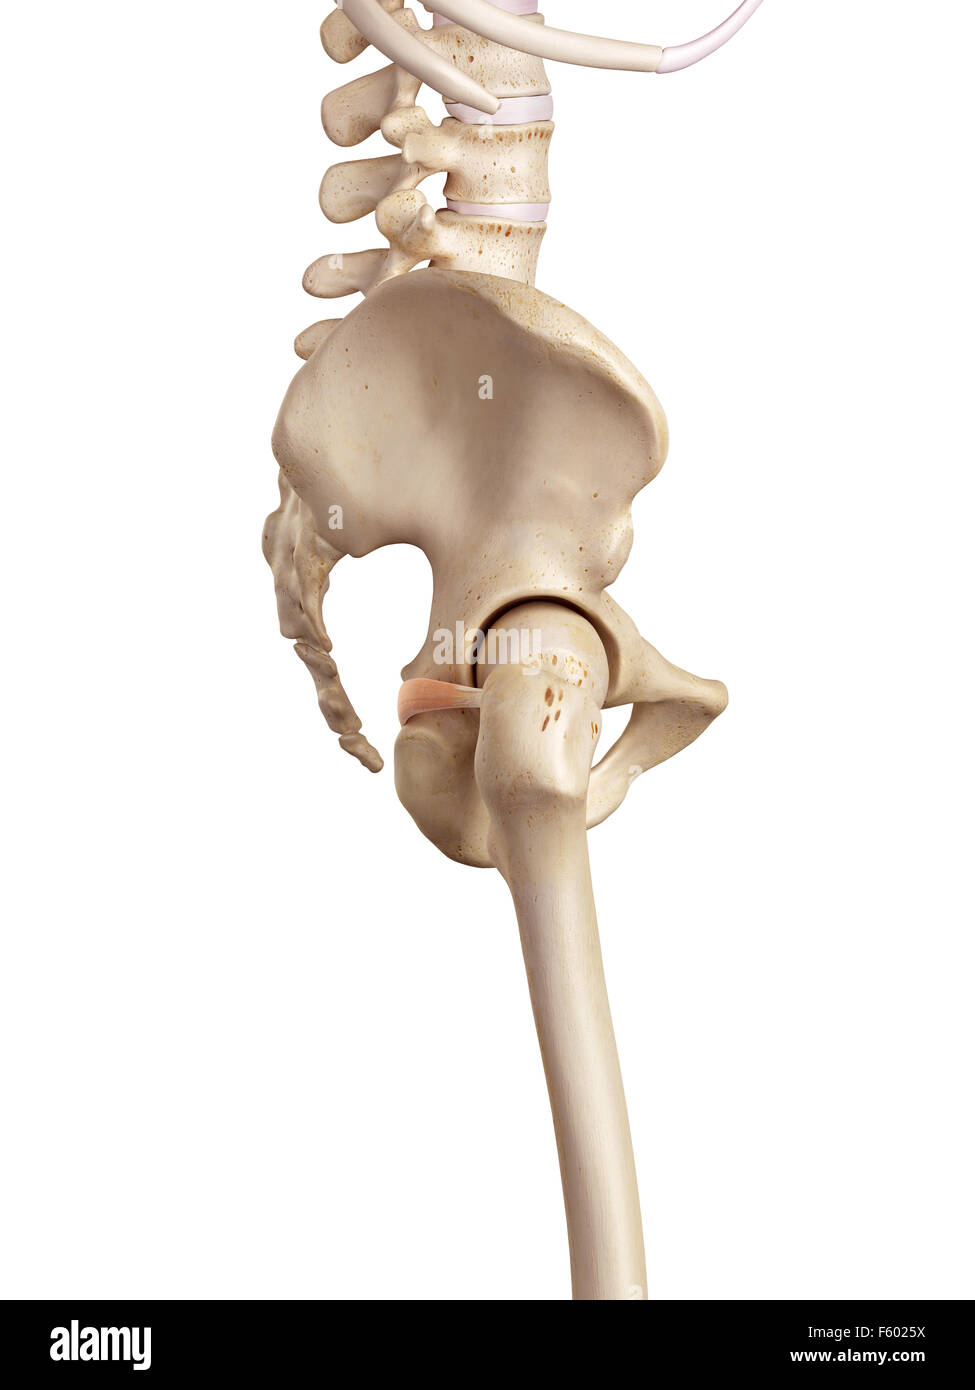 medical accurate illustration of the superior gemellus Stock Photo